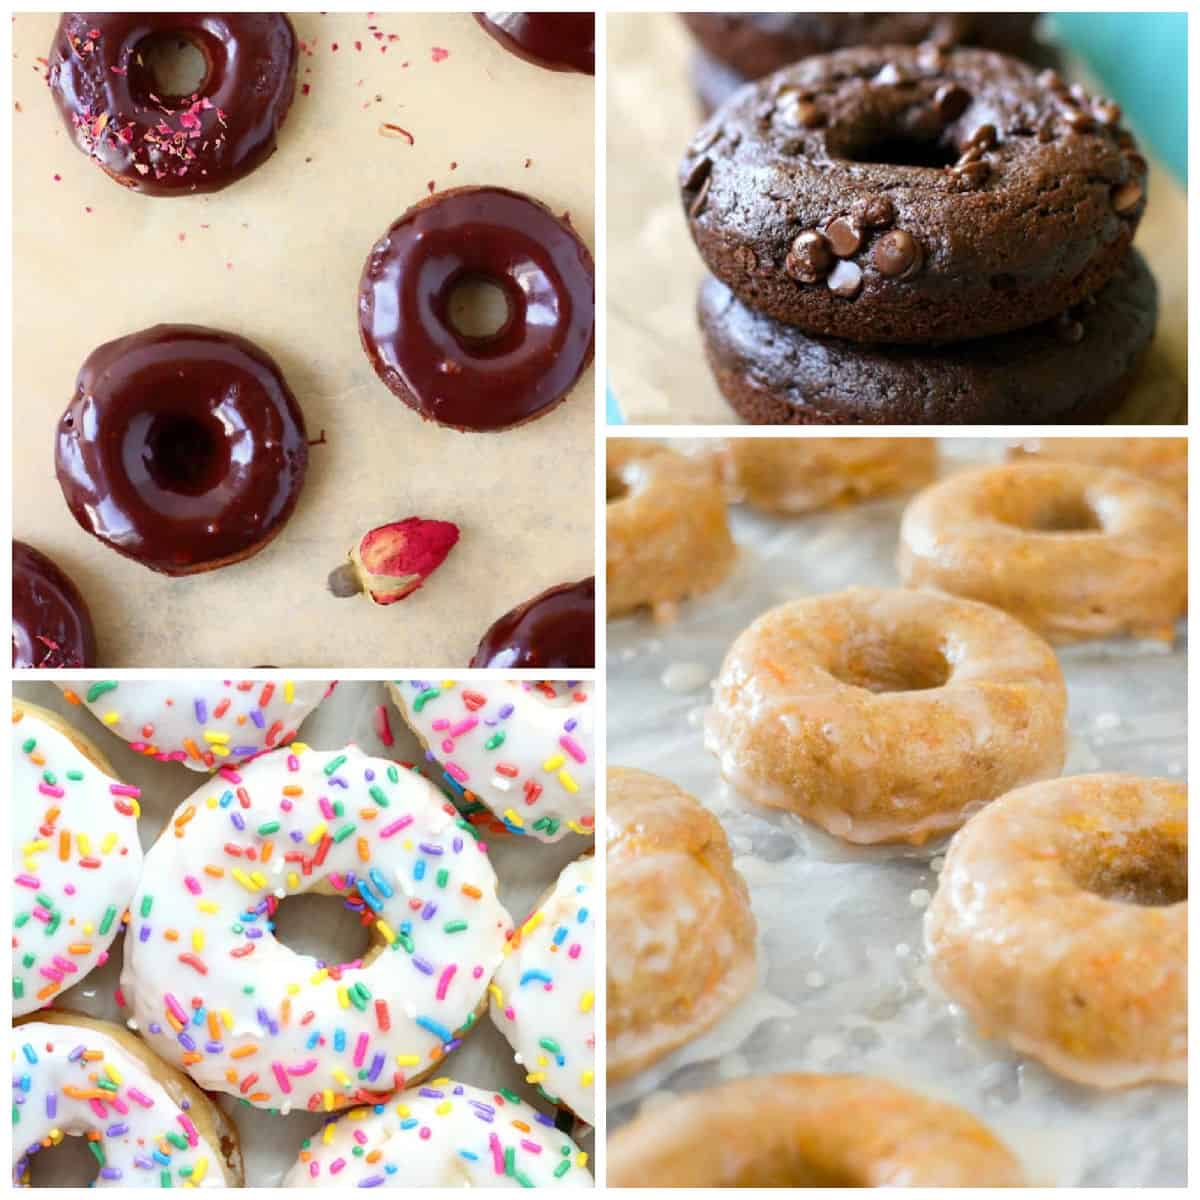 Glazed, with sprinkles, and chocolate covered donuts in a collage